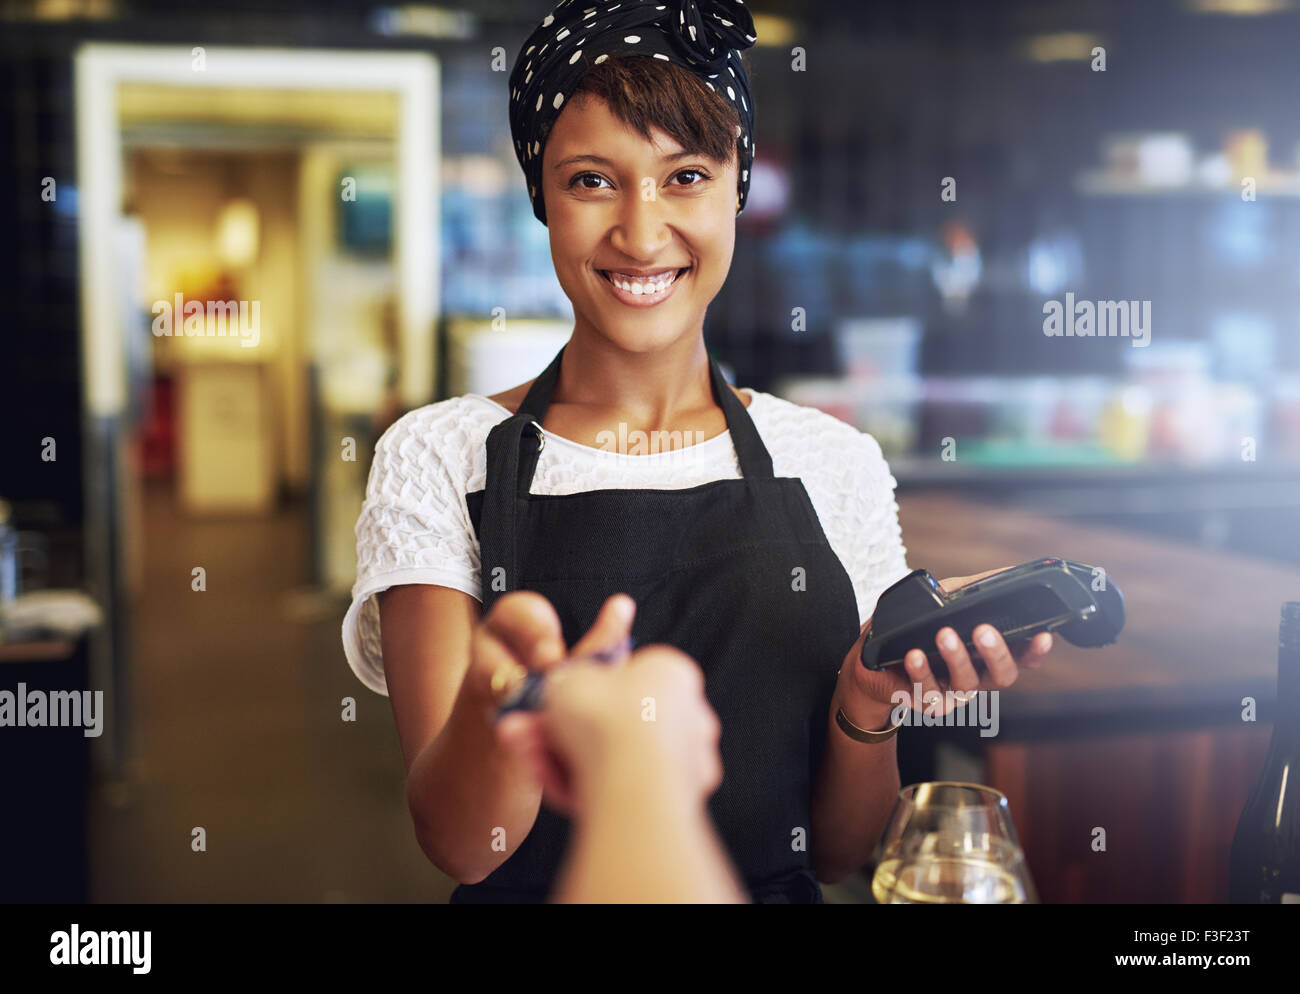 Smiling waitress or small business owner taking a credit card from a customer to process through the banking machine in payment Stock Photo